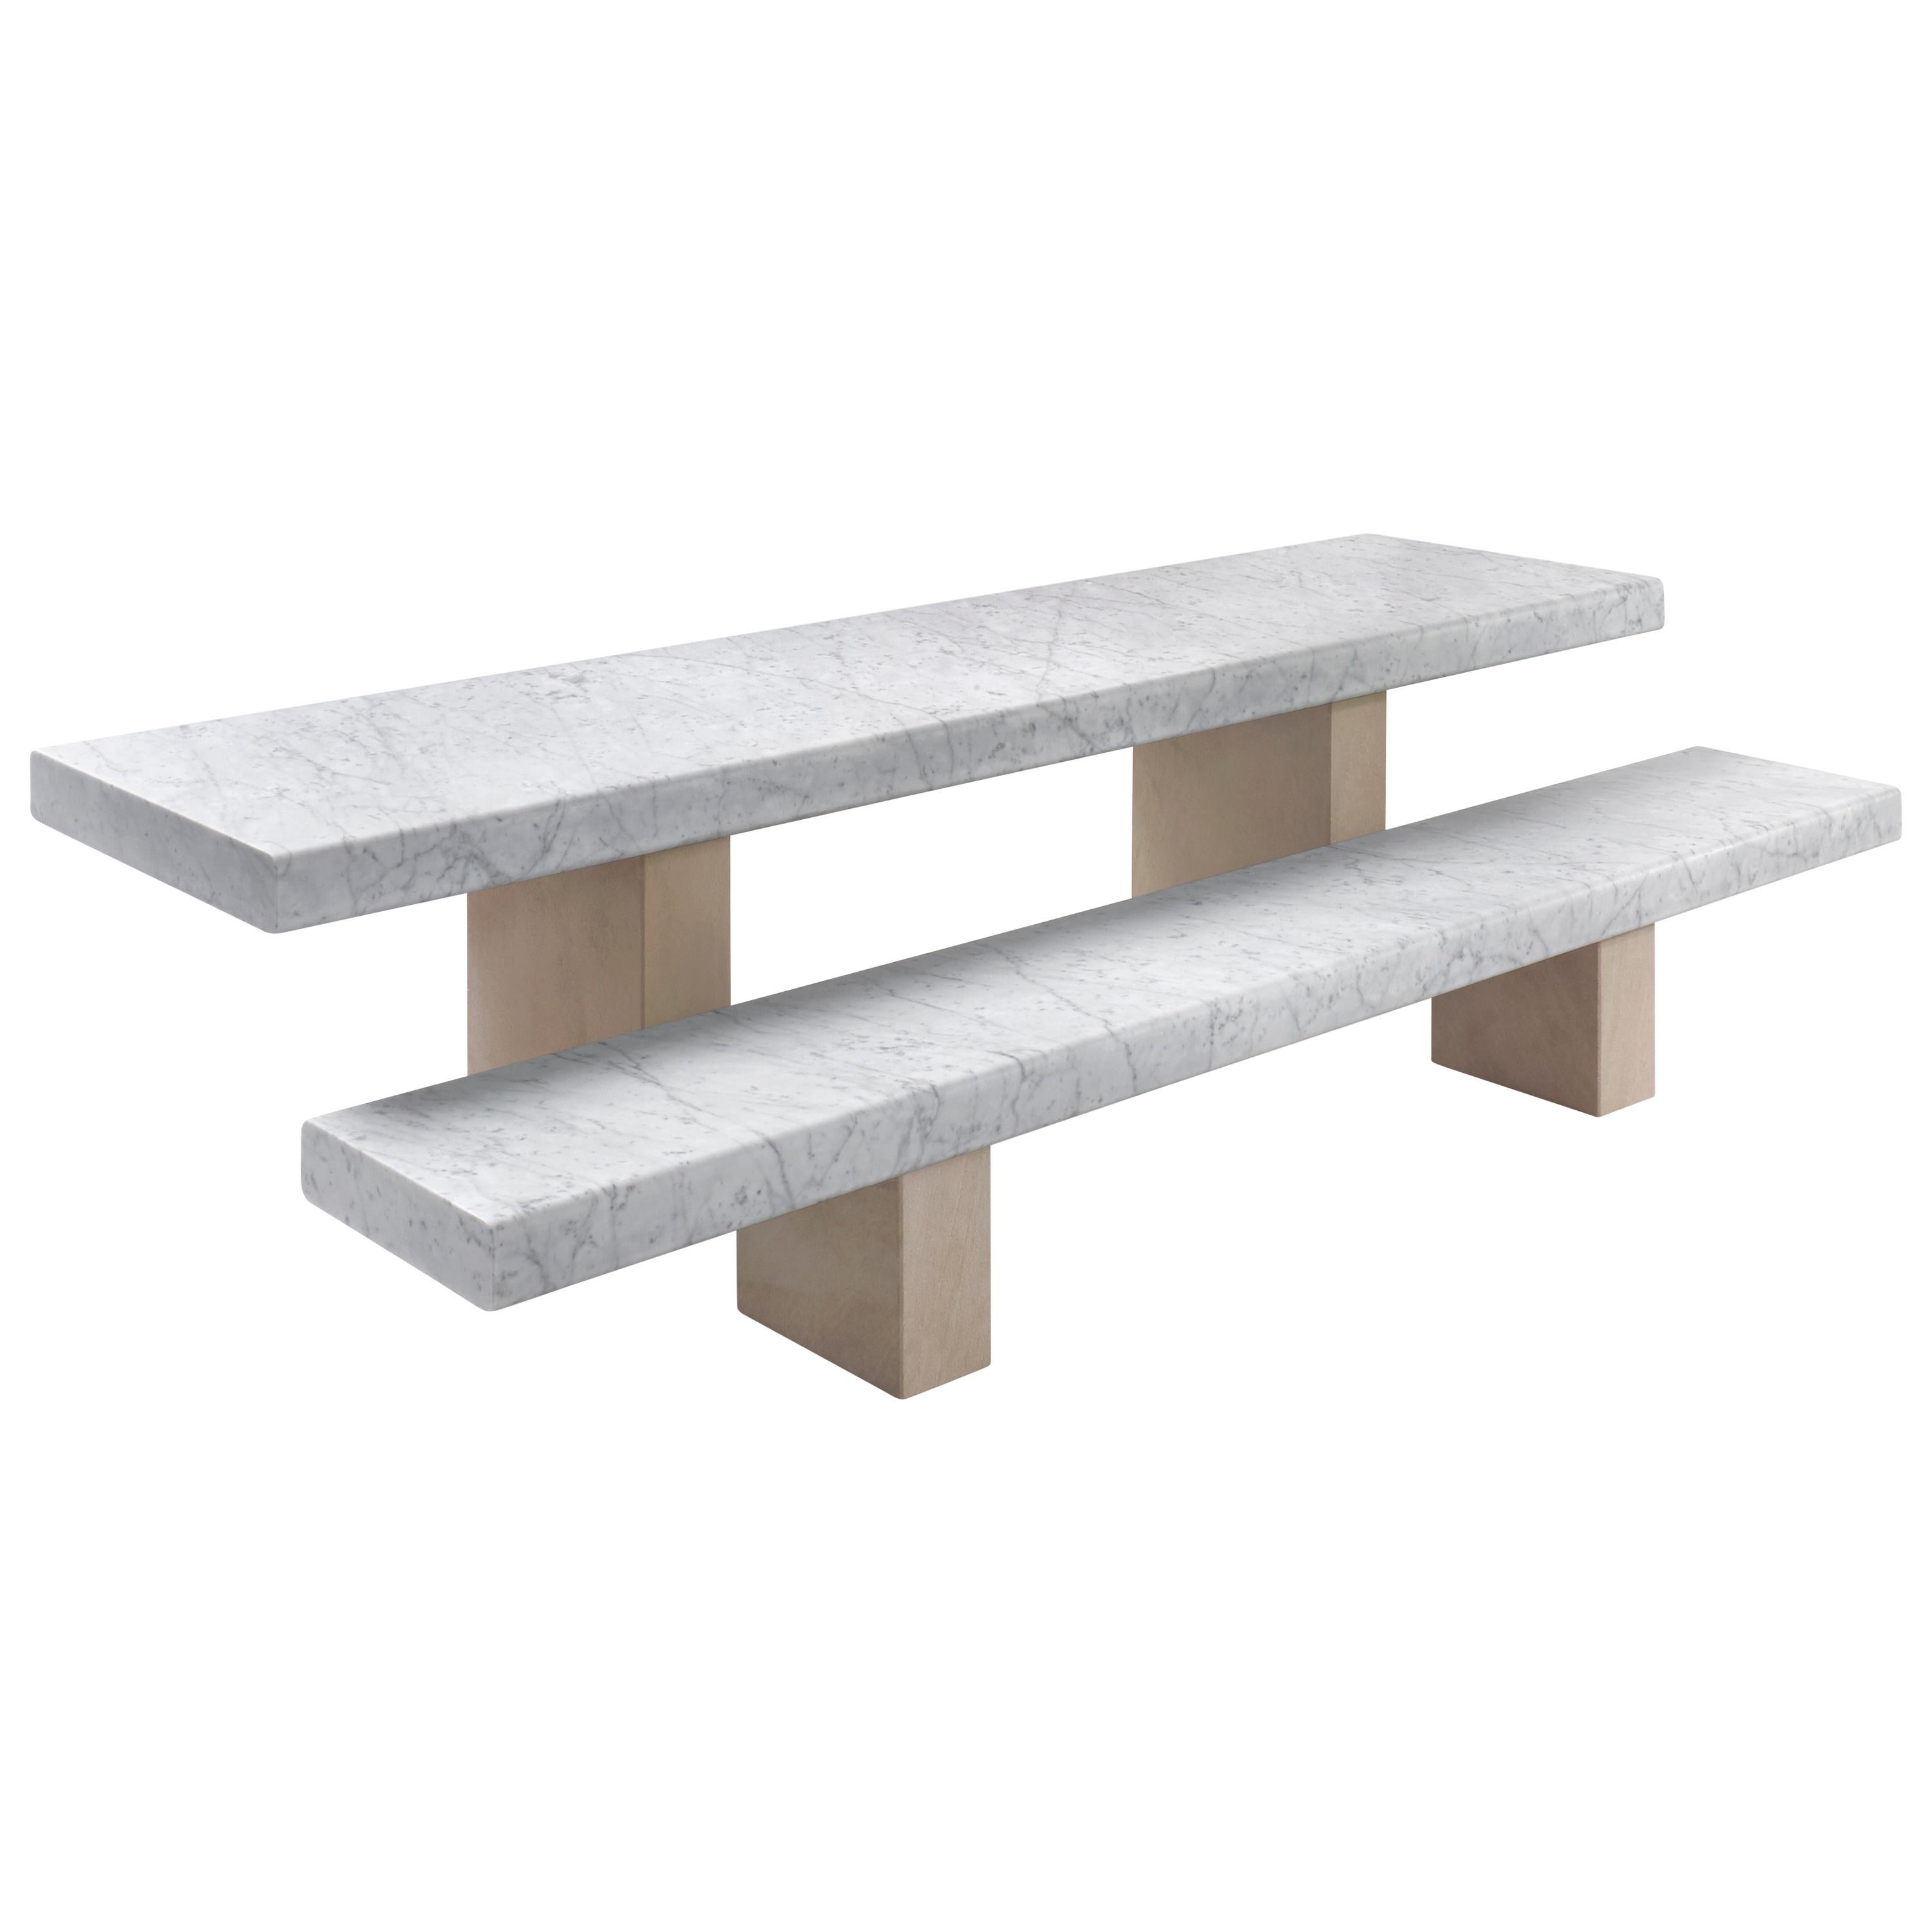 Modern Salvatori Span Outdoor Table and Bench in Bianco Carrara & Avana by John Pawson For Sale